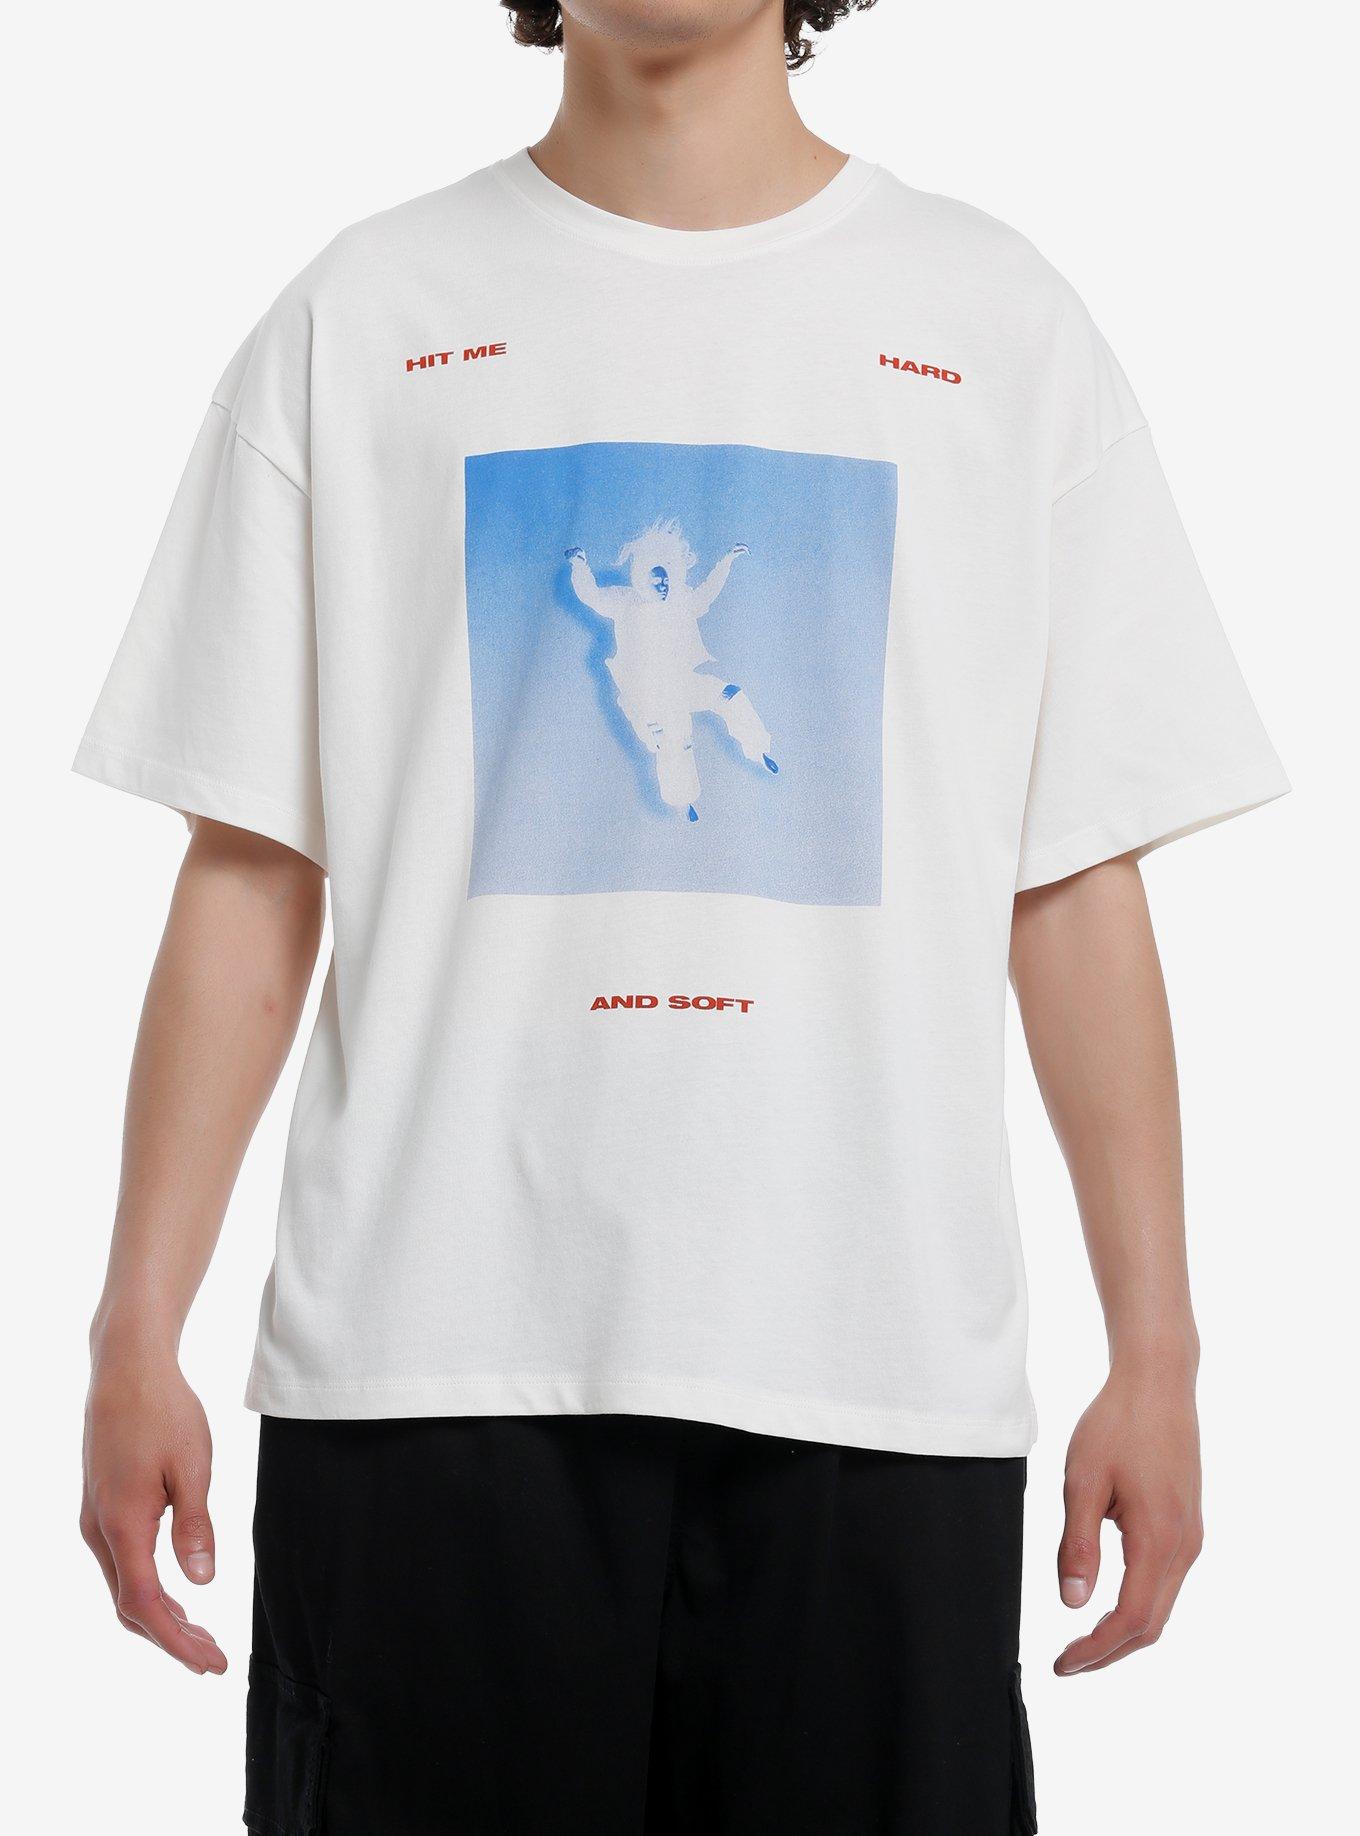 Billie Eilish Hit Me Hard And Soft Floating T-Shirt Hot Topic Exclusive, BRIGHT WHITE, hi-res